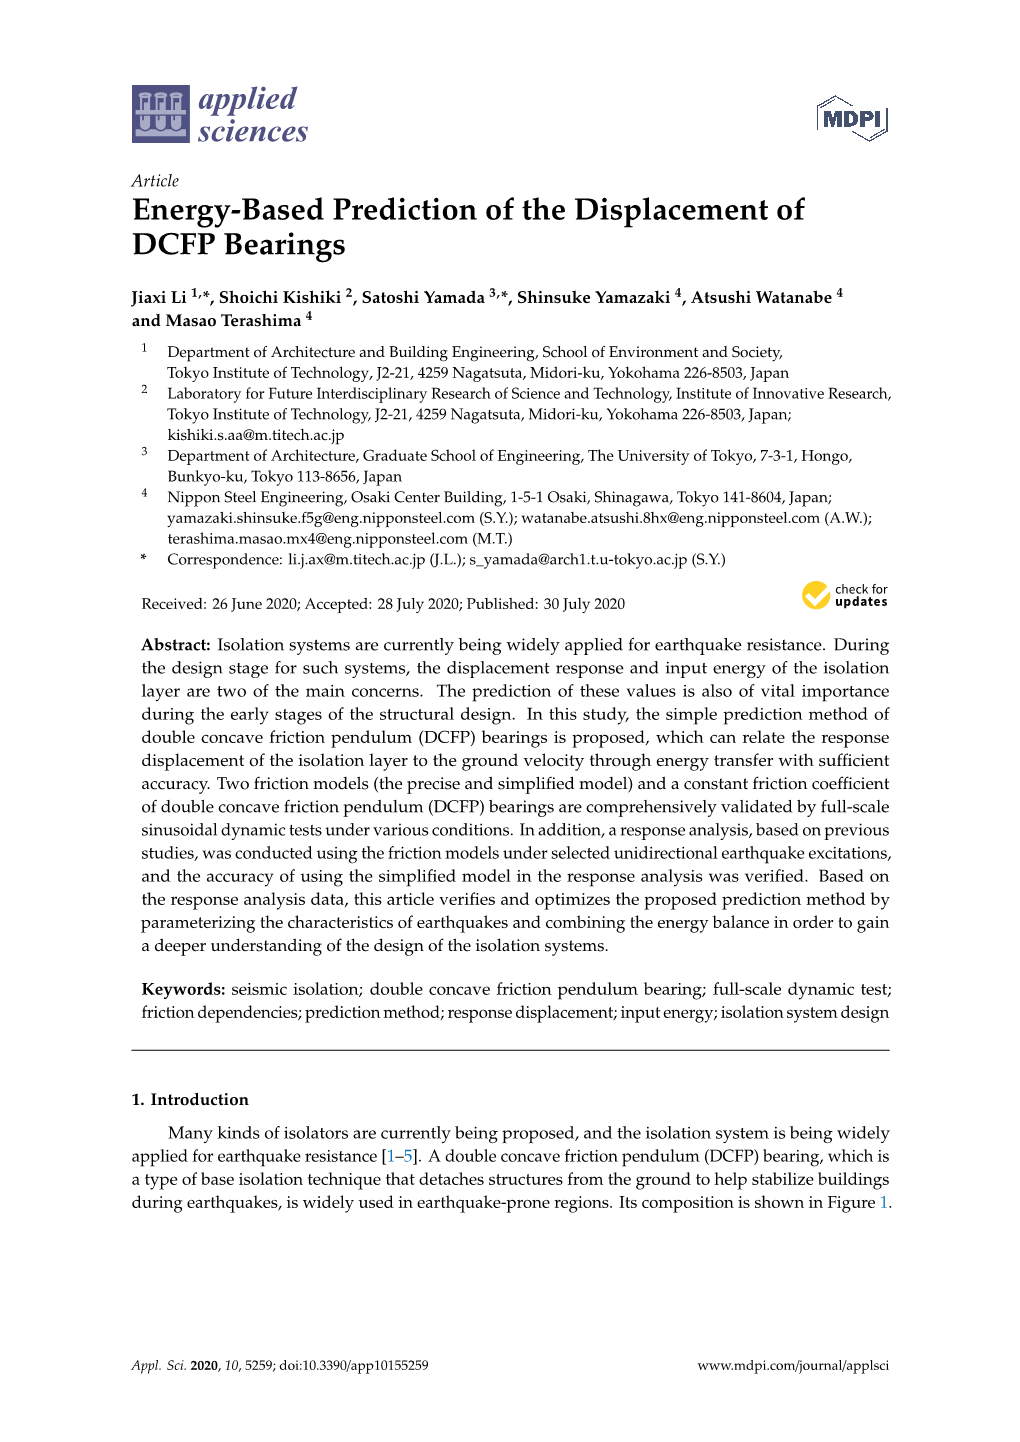 Energy-Based Prediction of the Displacement of DCFP Bearings